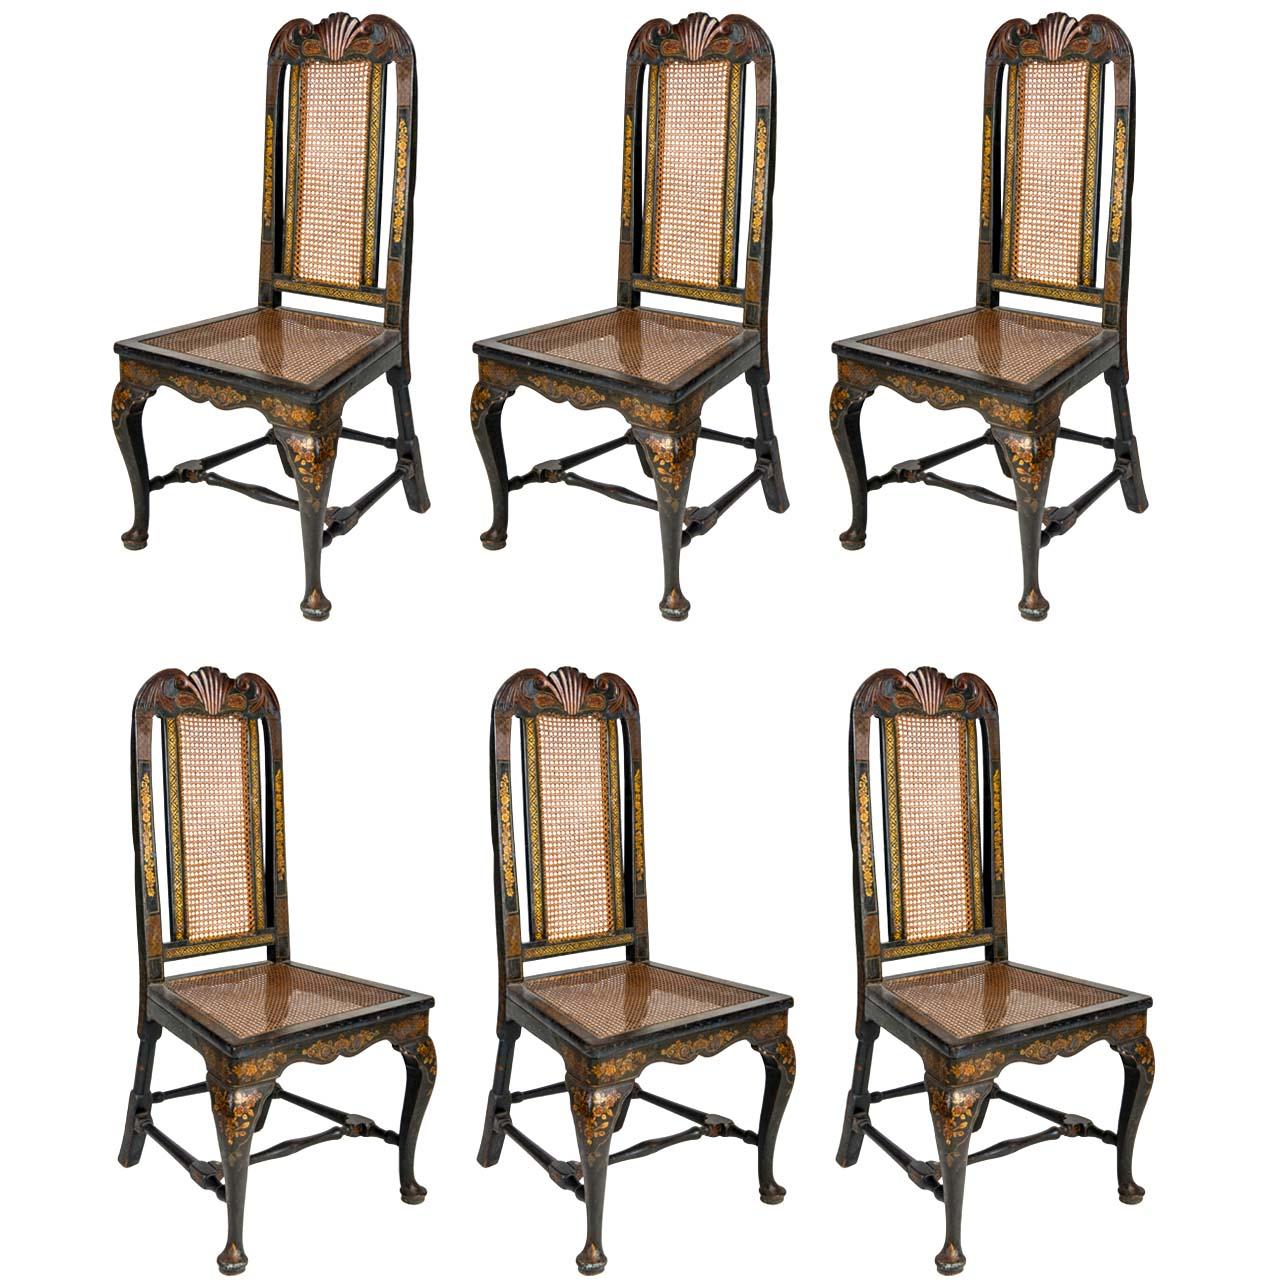 Six 18th Century Elegant Dining Room Chairs, England, 1750 For Sale 2